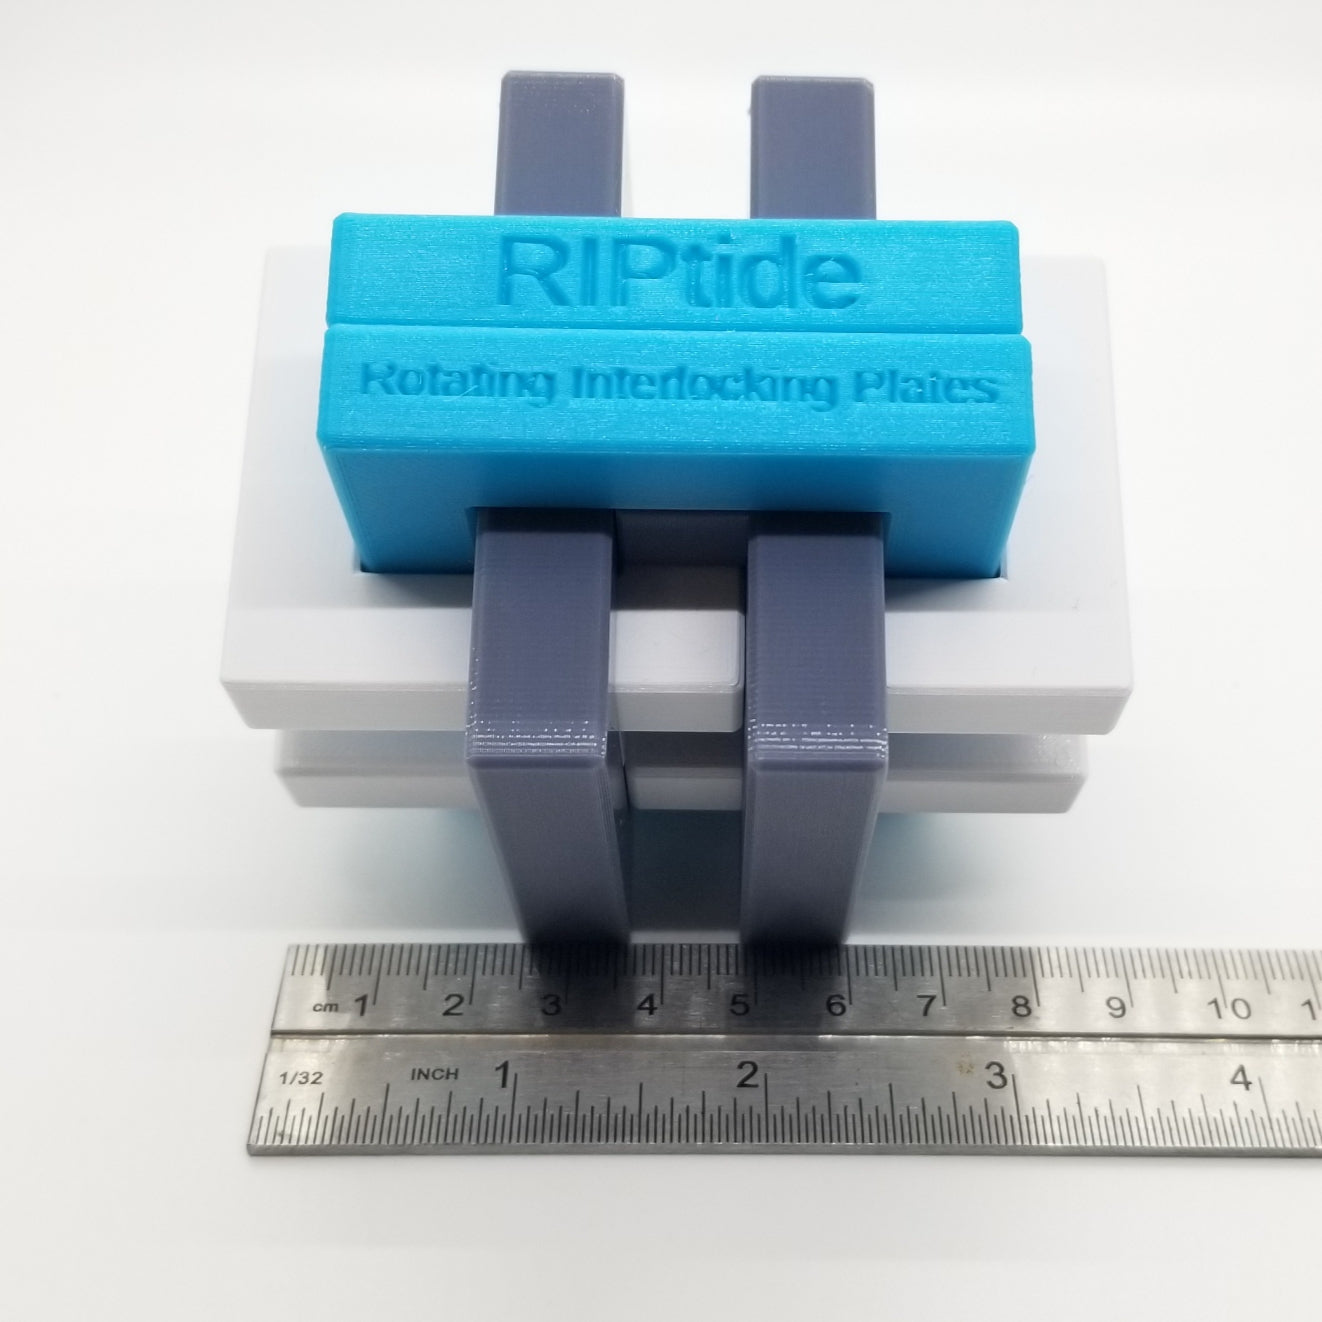 Download 3D Printable STL Files for 5 RIP (Rotating Interlocking Plate) Puzzles